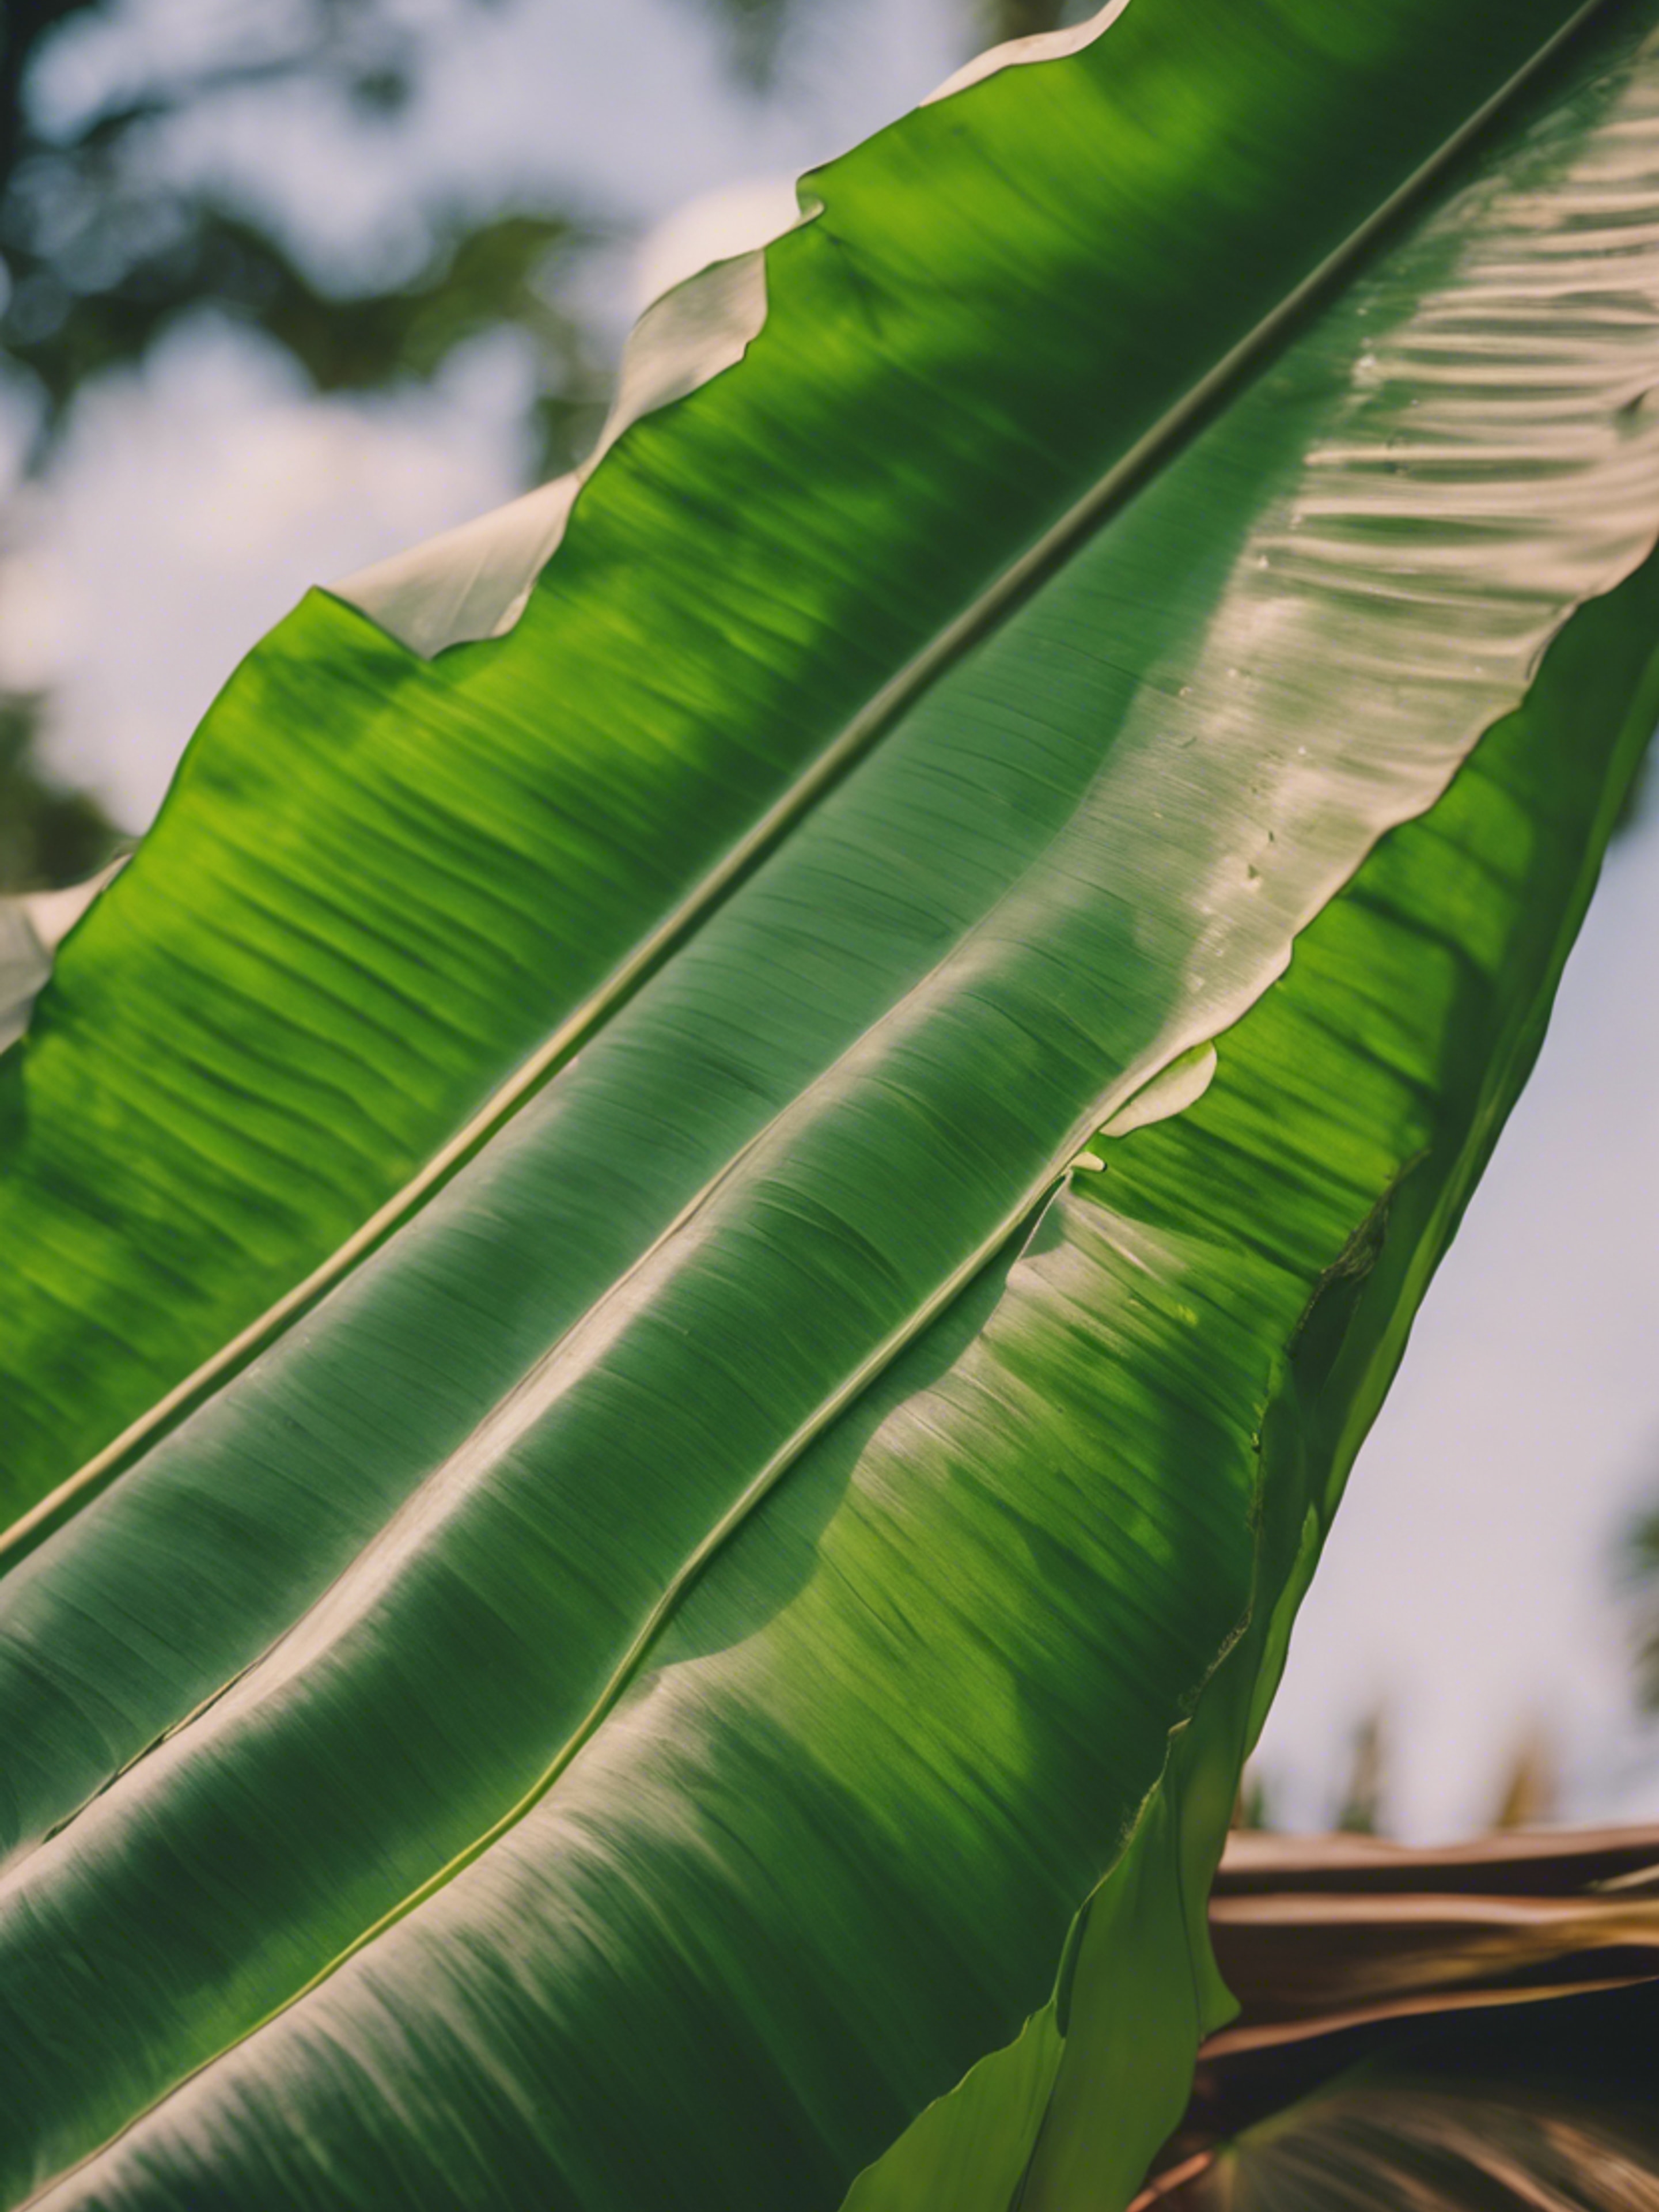 A banana leaf fashioned into a simple but sturdy homemade kite. Валлпапер[67483886efc74c5189dd]